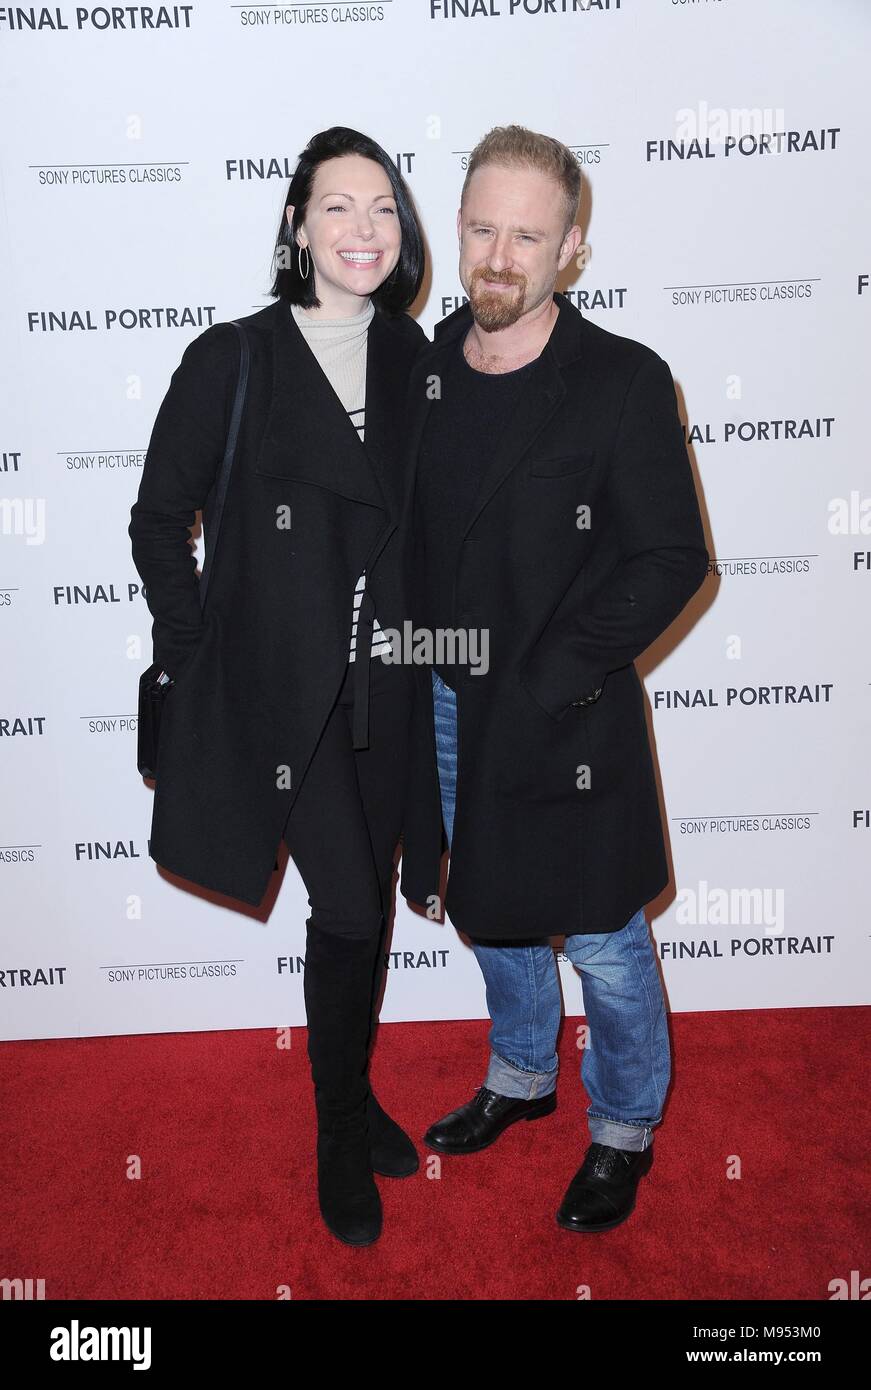 New York, NY, USA. 22nd Mar, 2018. Laura Prepon, Ben Foster at arrivals for Sony Pictures Classics' FINAL PORTRAIT Premiere, Solomon R. Guggenheim Museum, New York, NY March 22, 2018. Credit: Kristin Callahan/Everett Collection/Alamy Live News Stock Photo